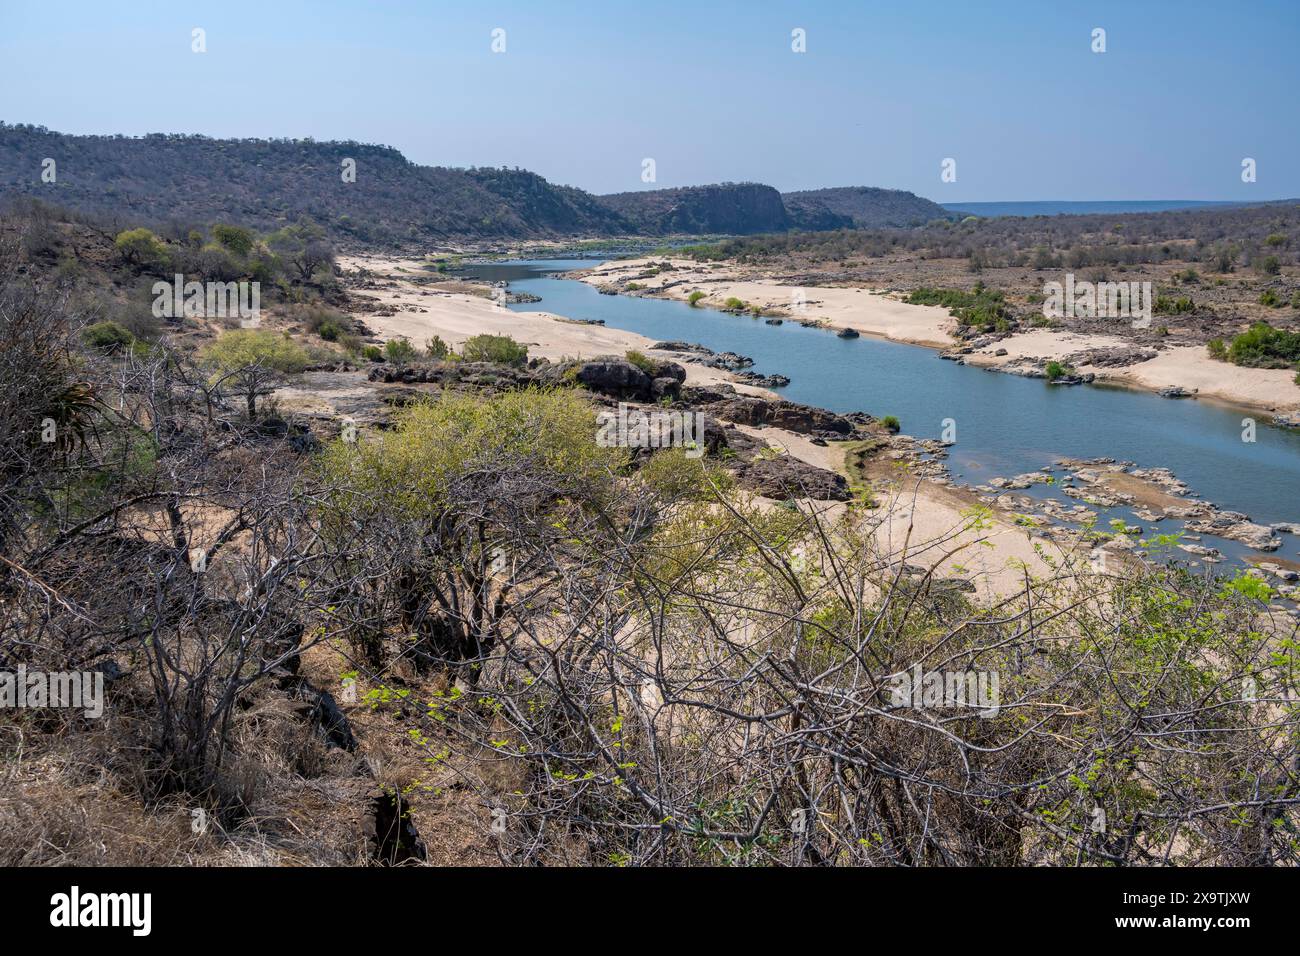 View over dry African savannah, Olifants River, Kruger National Park, South Africa Stock Photo